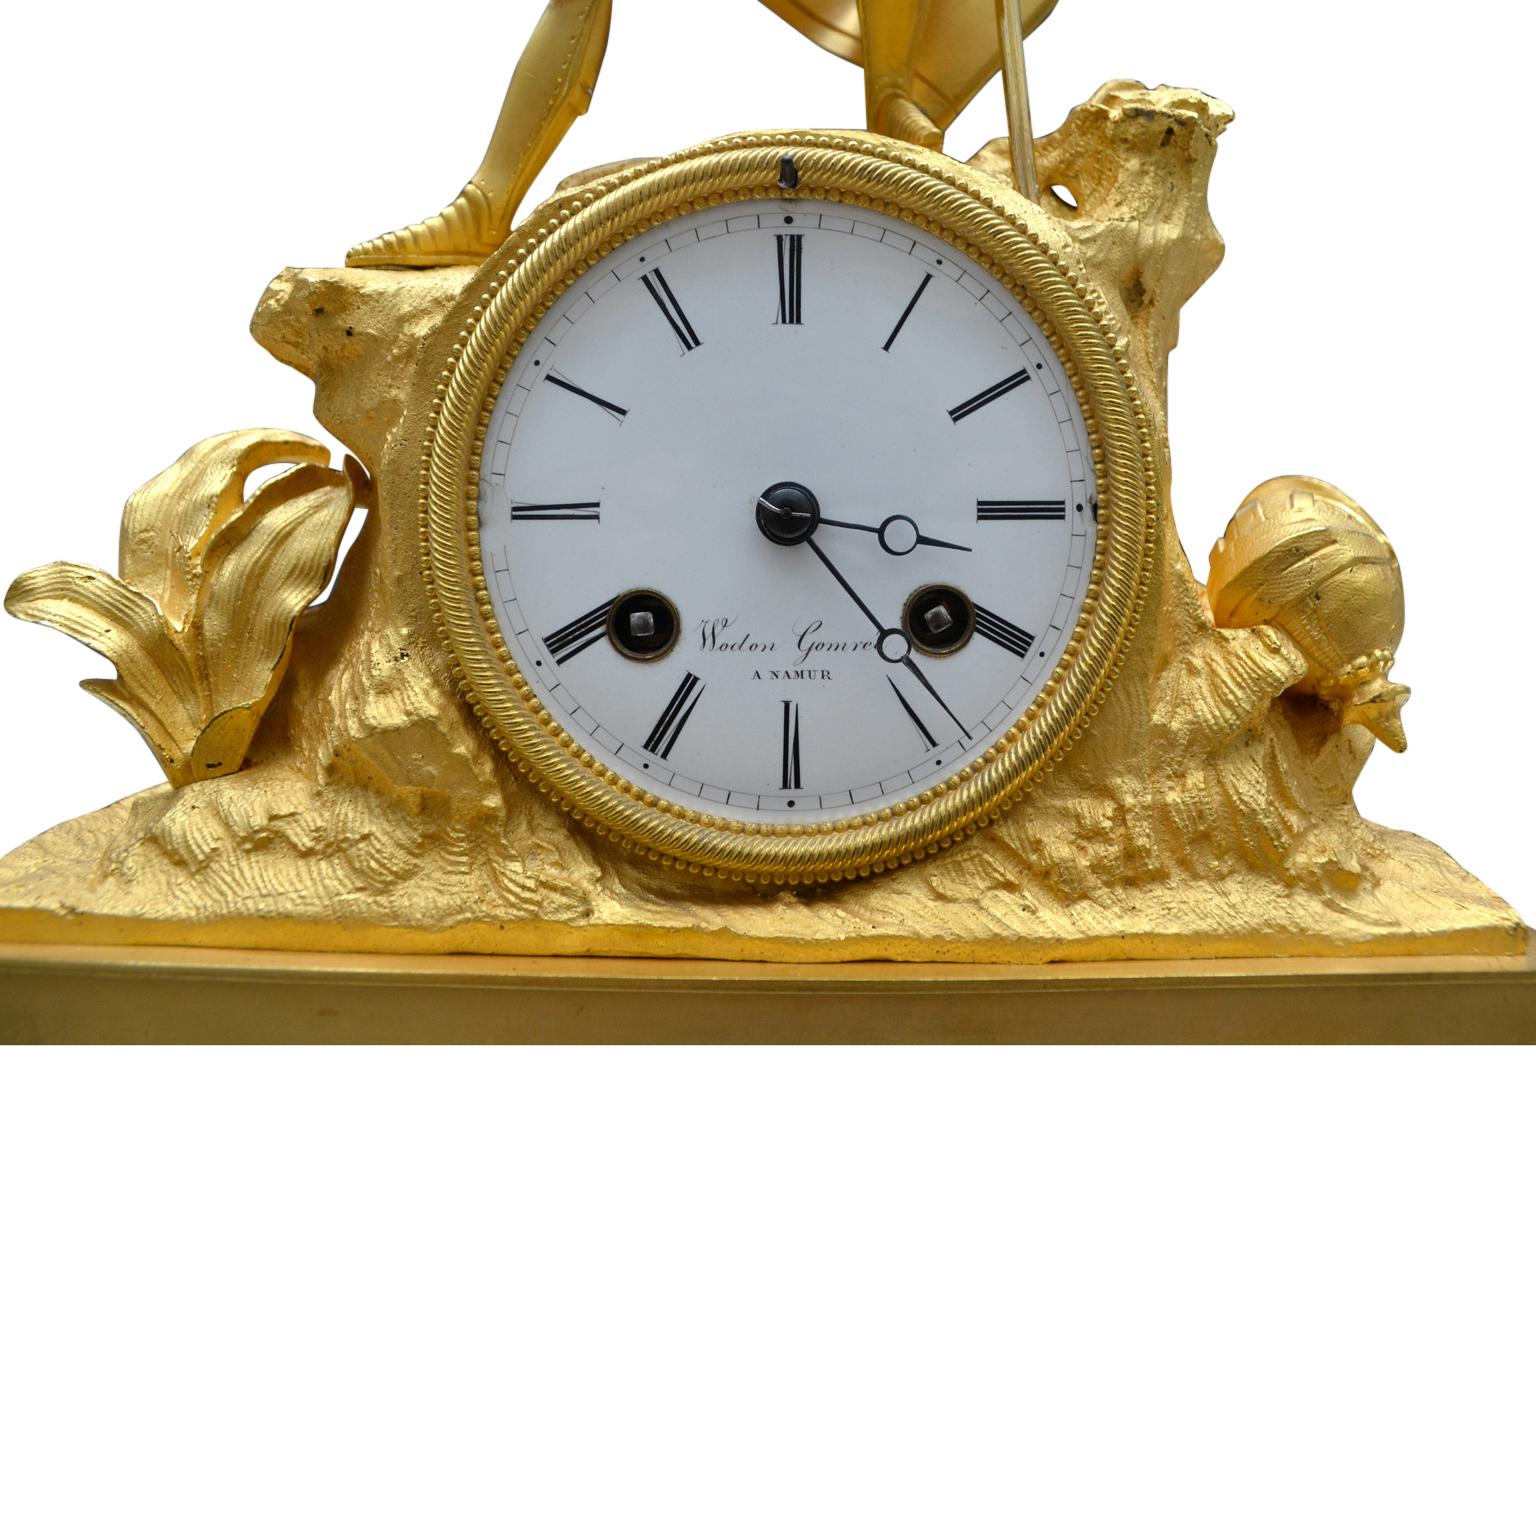 Napoleon III Gilt Bronze Clock of a  Victorious Crusader Knight  in Battle In Good Condition For Sale In Vancouver, British Columbia